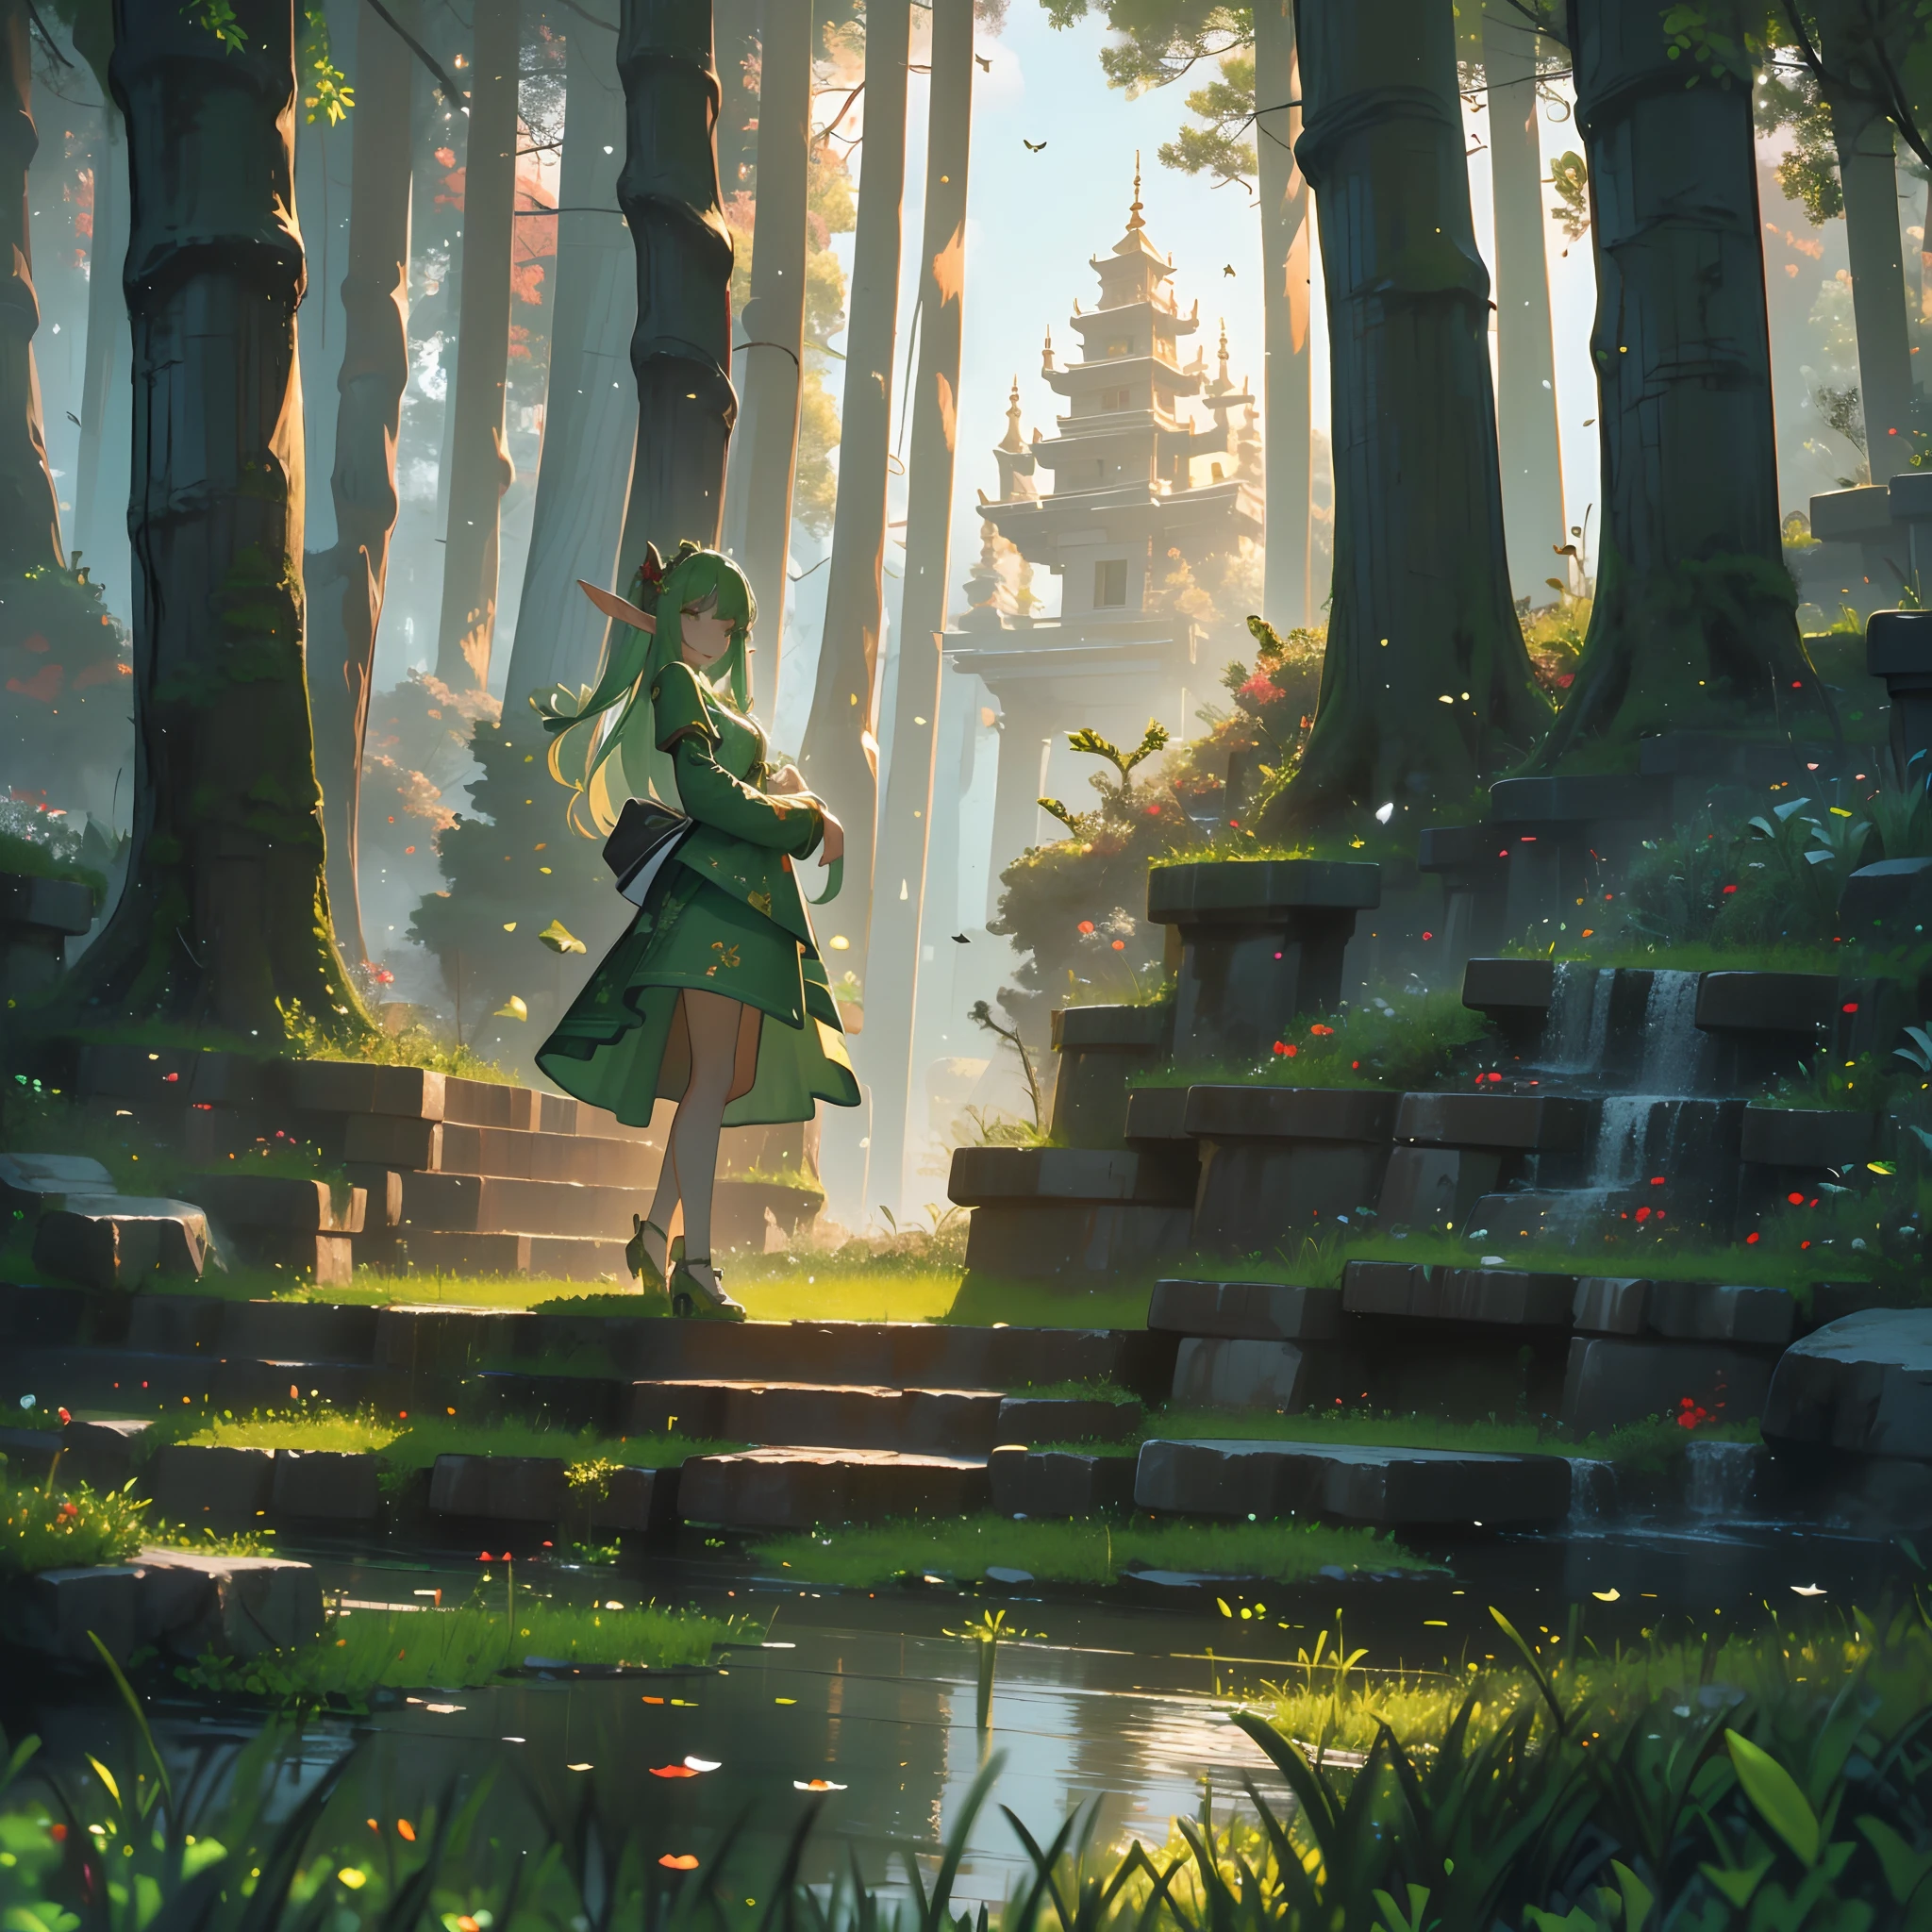 (8k wallpaper:1.2),(Ultra-high resolution:1.2),(masterpiece:1.1),wallpaper,High quality,masterpiece,(High detail),1woman,elf, wearing a green warrior dress, surrounded by elves, houses on trees,elves holding bows, extremely beautiful elves, luscious golden hair, surrounded by trees, forest biome, absolutely stunning art, extremely detailed, high resolution, highest quality digital art,